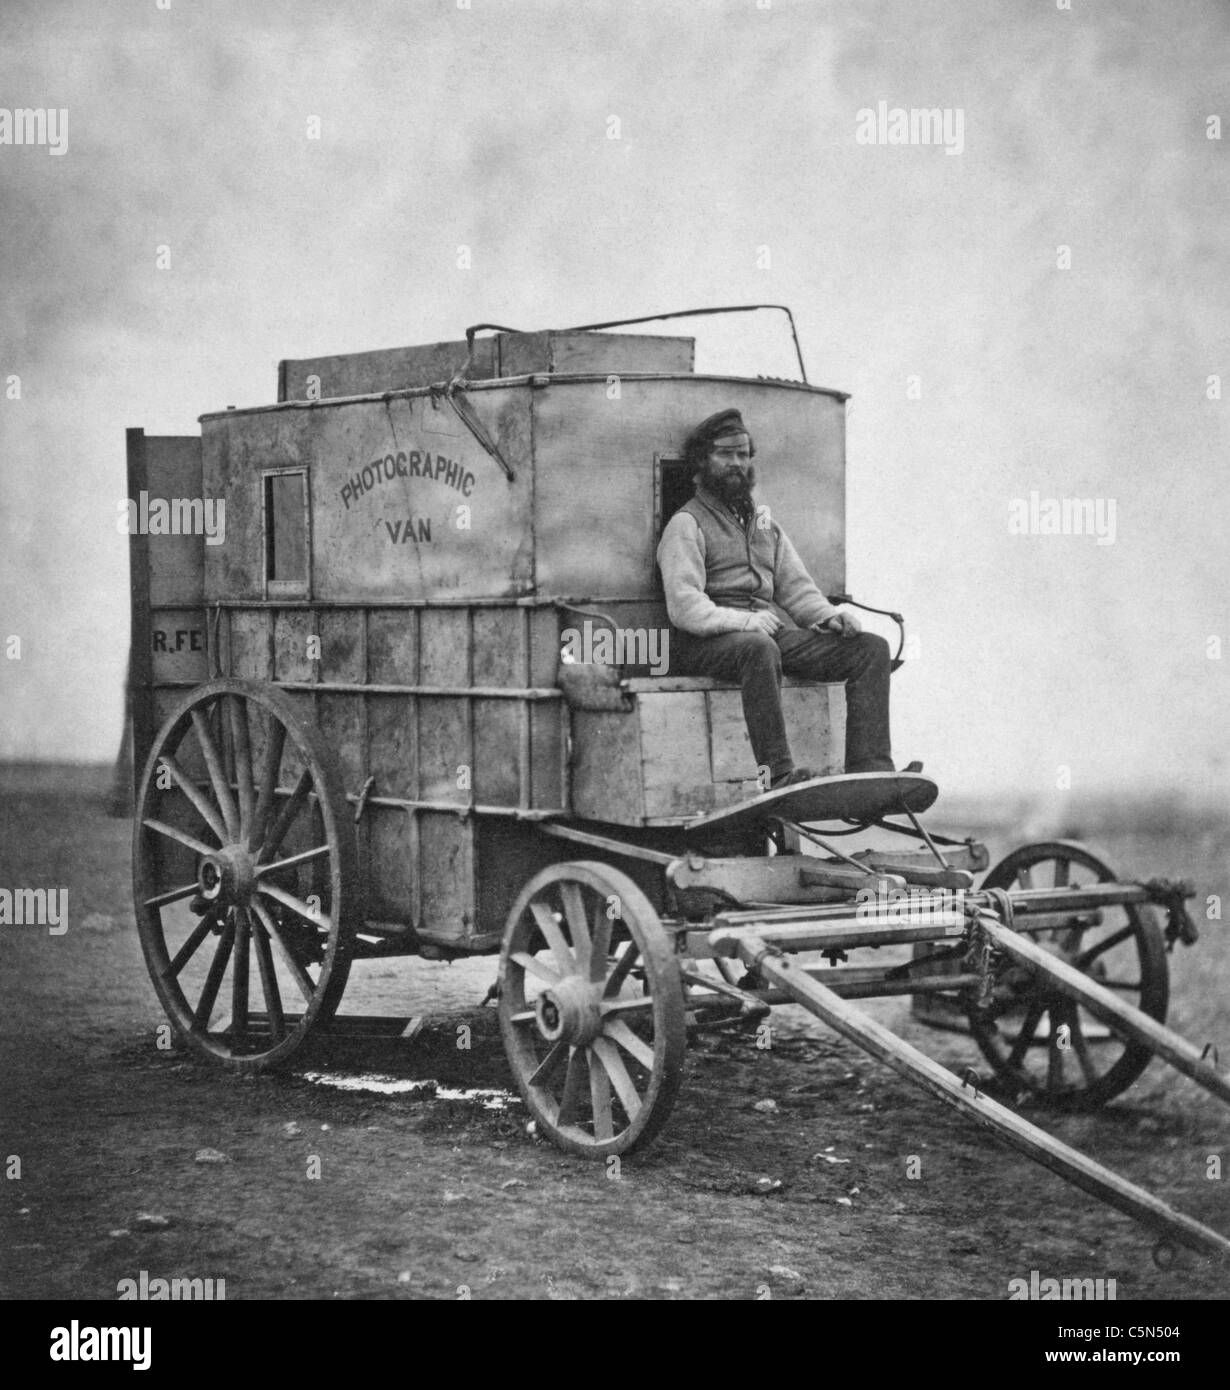 Artist's Van -  Marcus Sparling, full-length portrait, seated on Roger Fenton's photographic van, during the Crimean War, 1855 Stock Photo